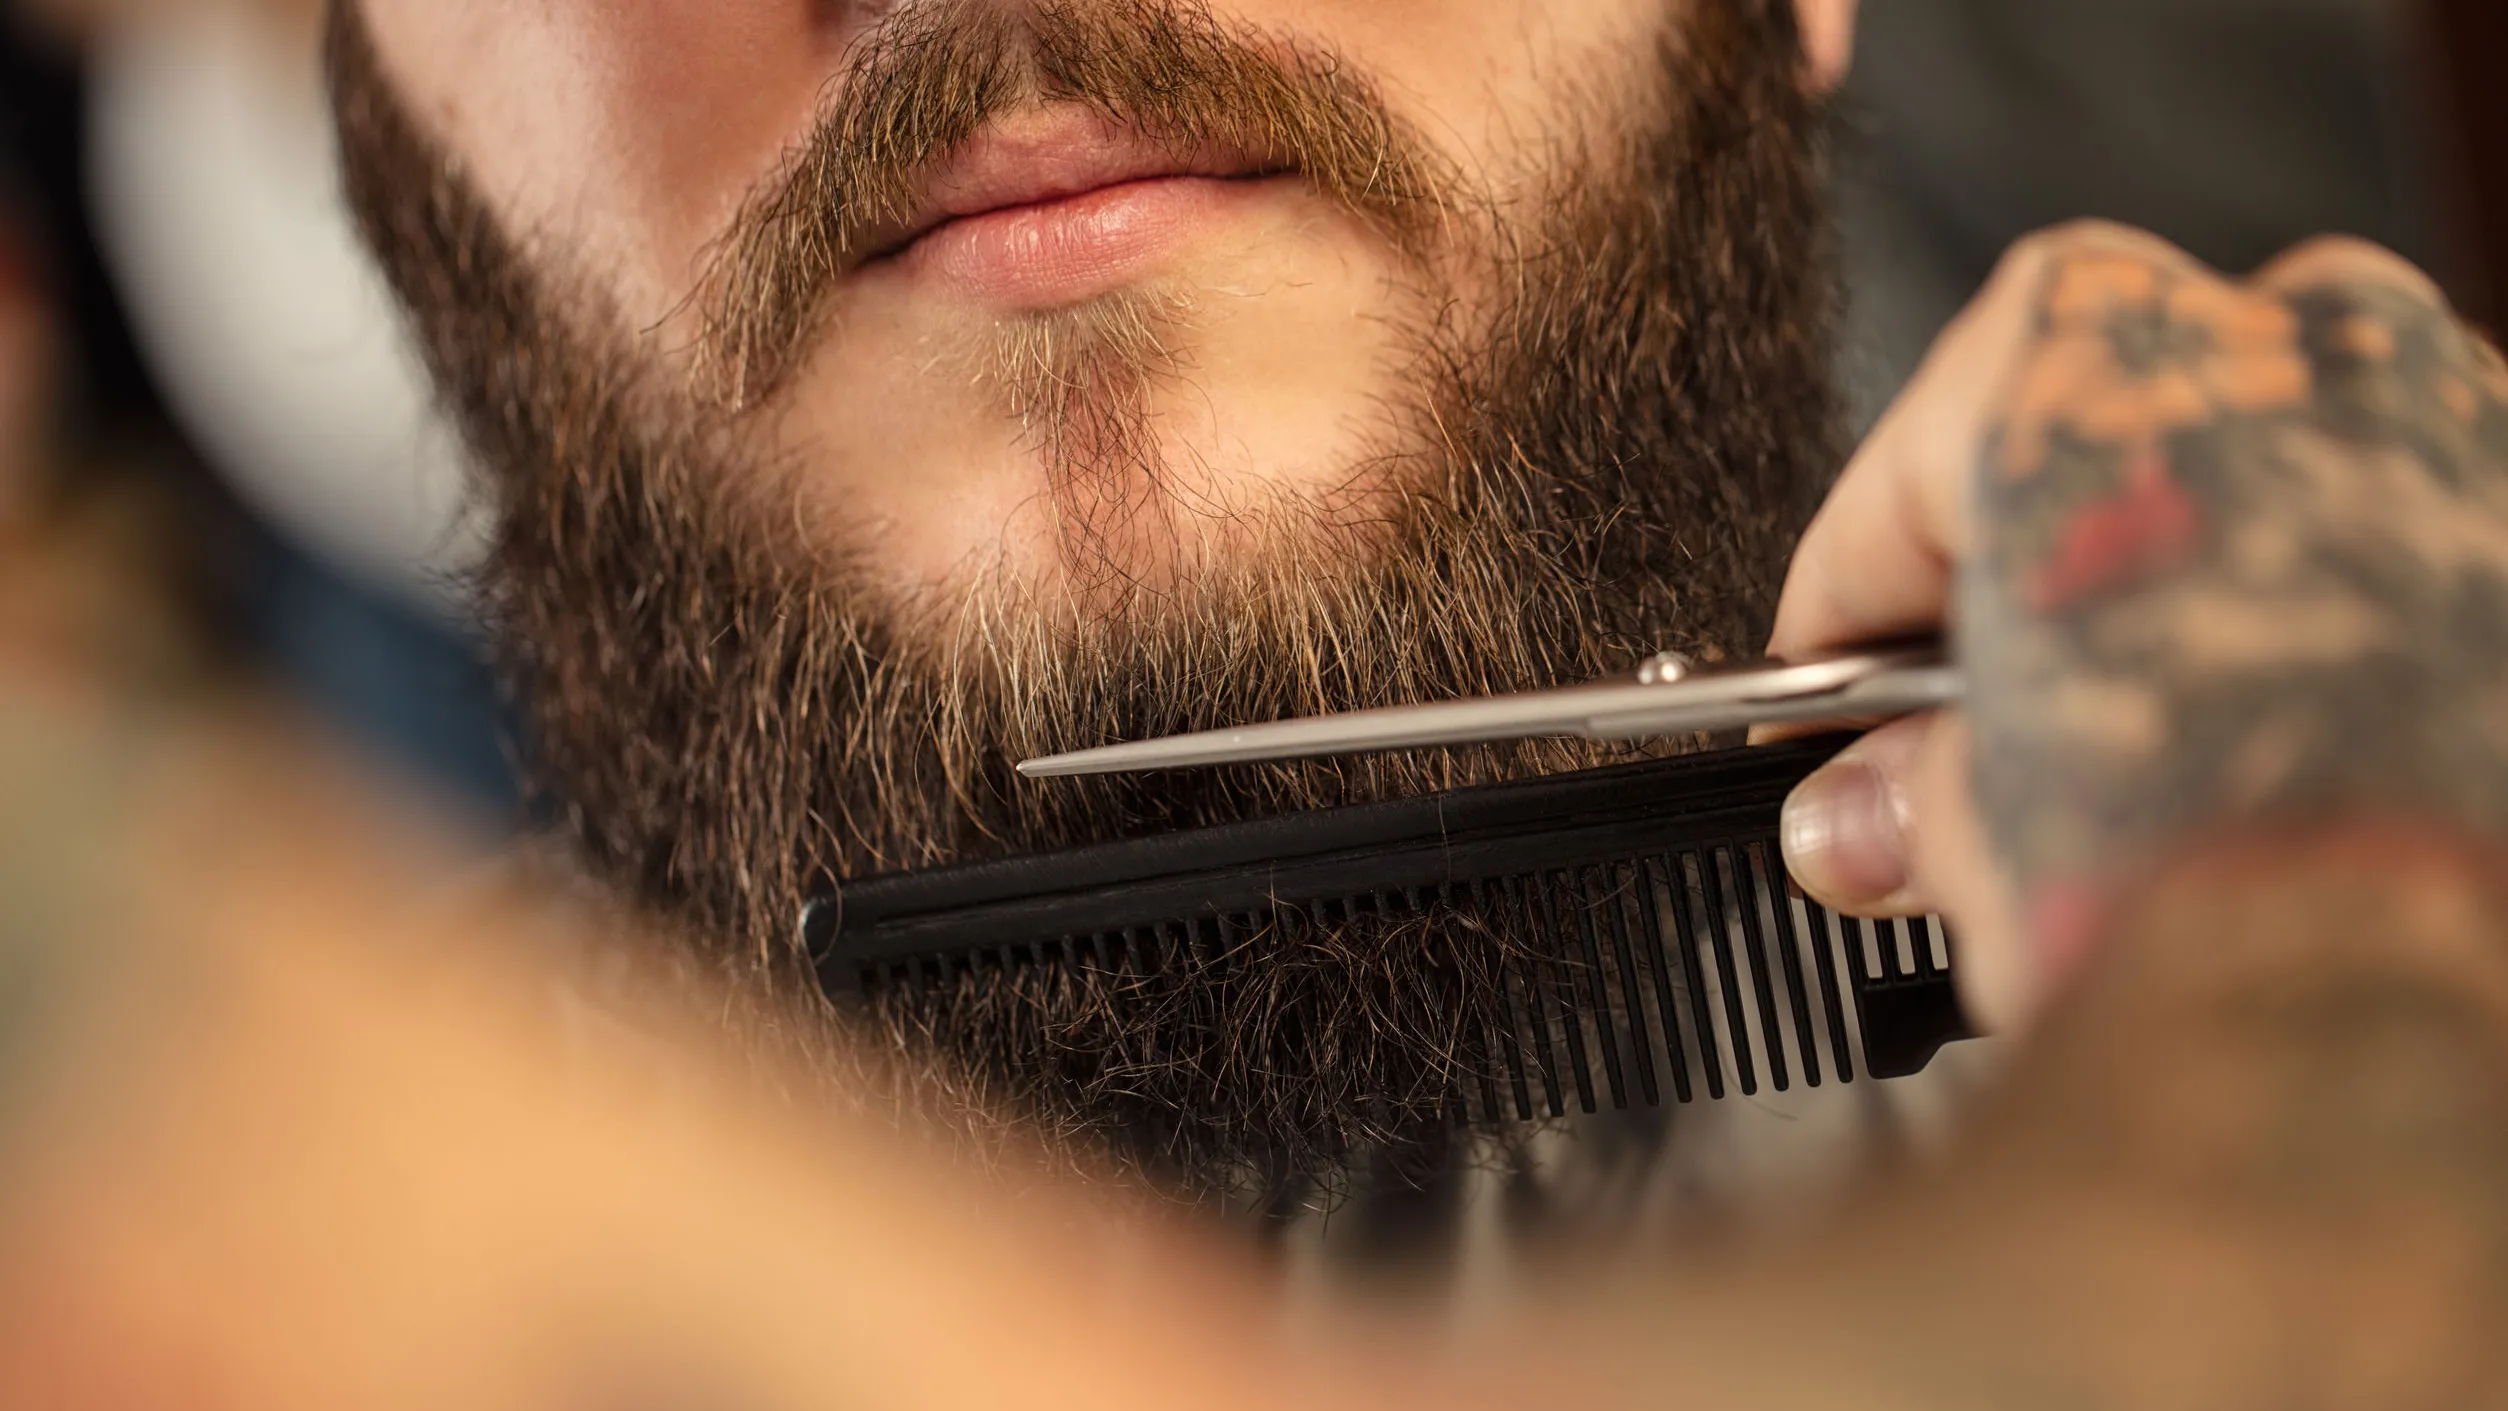 Practice Proper Beard Maintenance If you have facial hair, maintain it by trimming, shaping, and grooming your beard regularly. Invest in a quality beard trimmer and beard oil to keep your beard looking neat and conditioned. ]]>